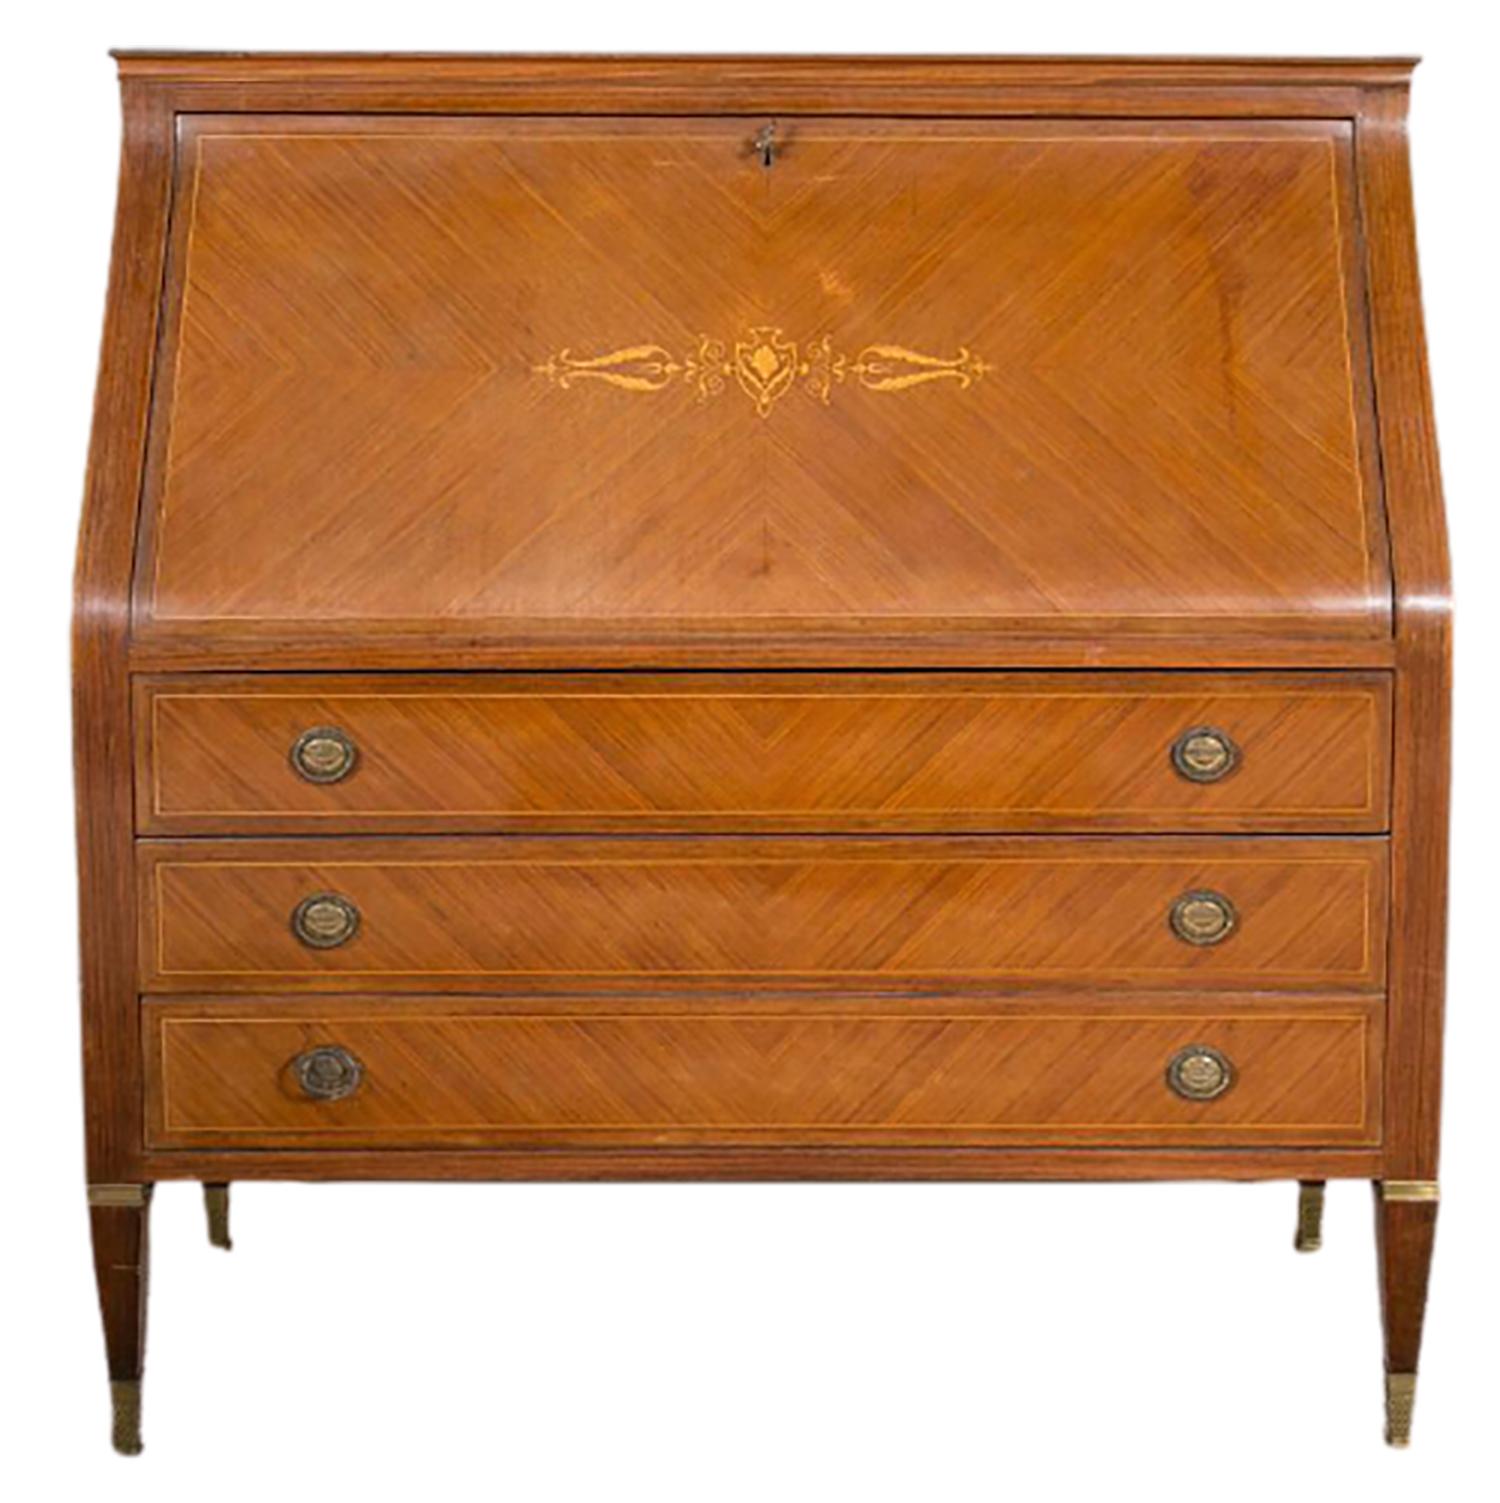 Italian Paolo Buffa style inlaid slant front desk with fitted desk/vanity interior. The tapering and sleek lines make this stylish and exquisite desk a must have for any home or office. The lower half having three drawers while the top half having a